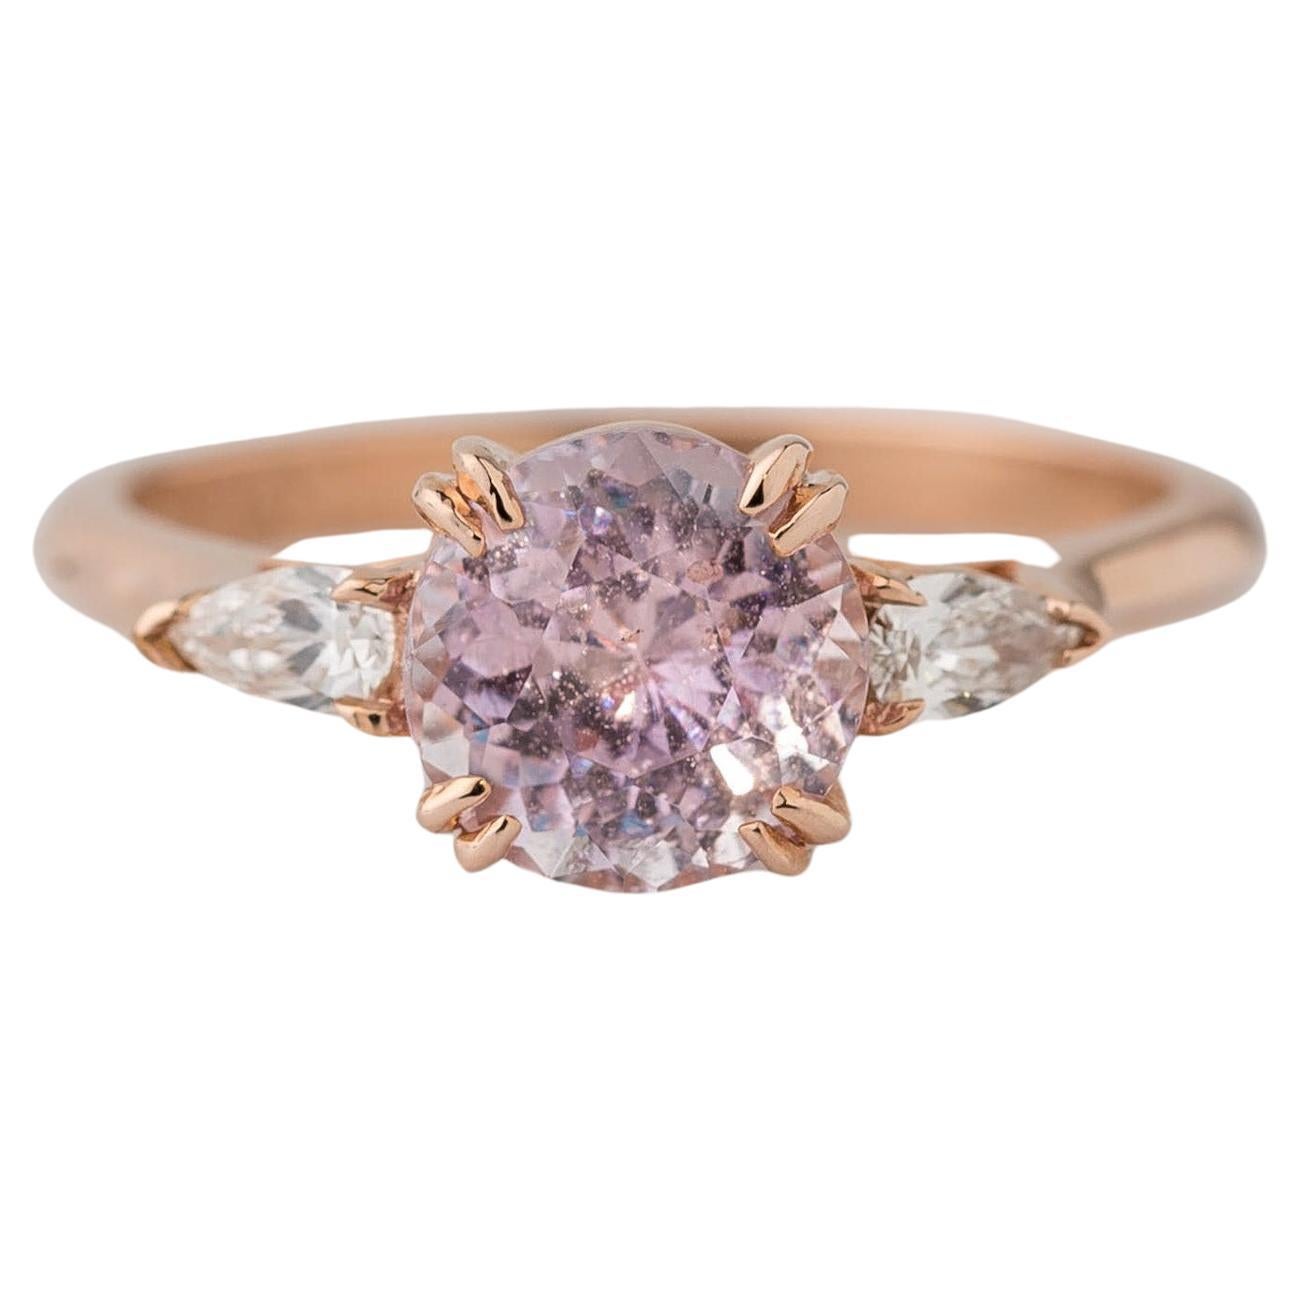 For Sale:  GIA Certified 1.92 Natural Pink Sapphire Three Stone Diamond Ring